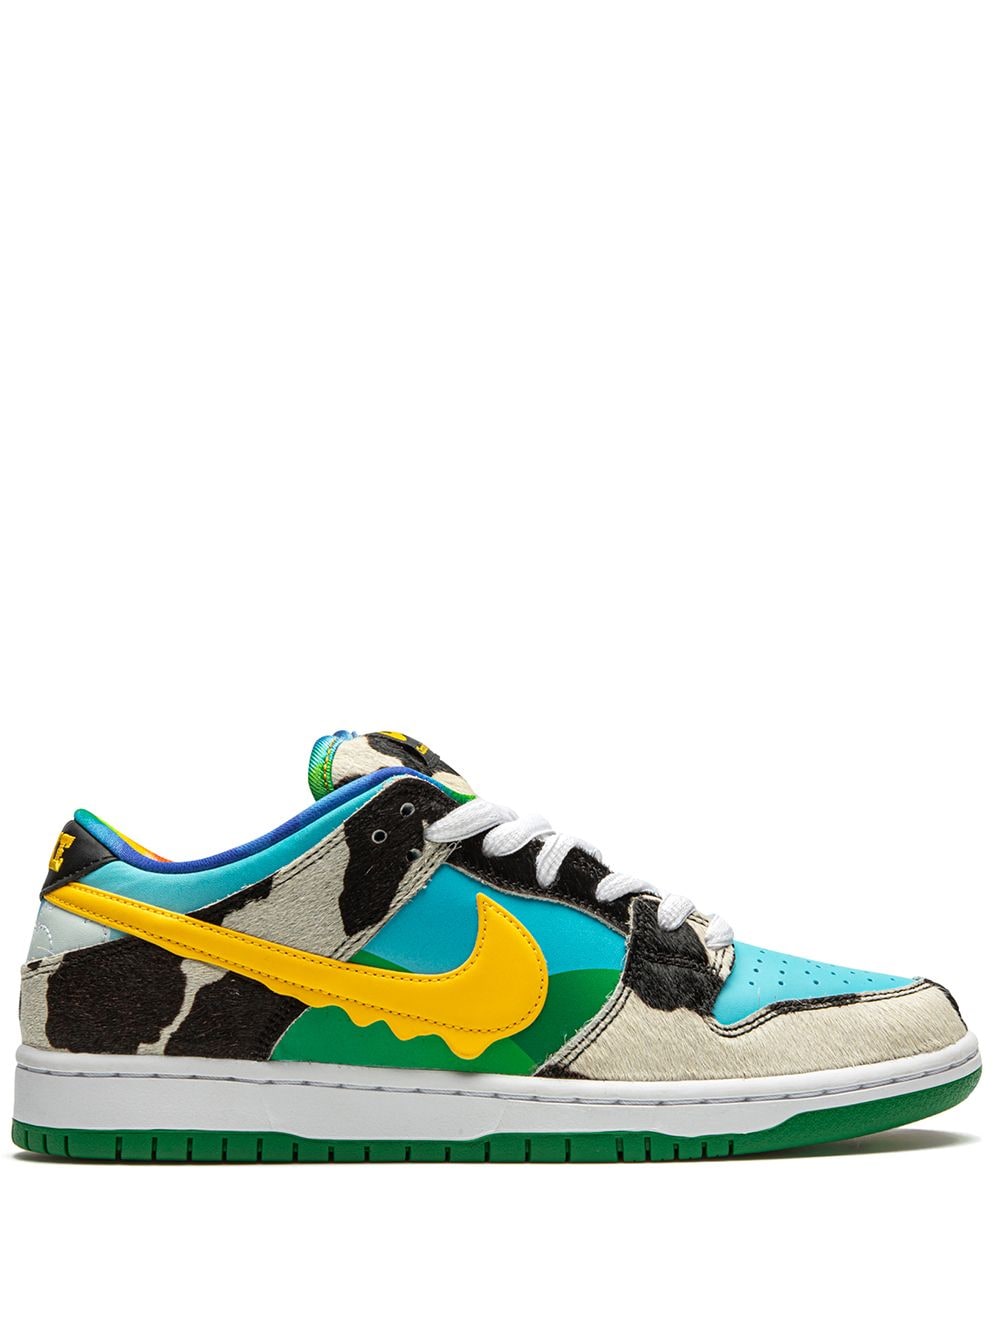 sb dunk low x ben & jerry's chunky dunky